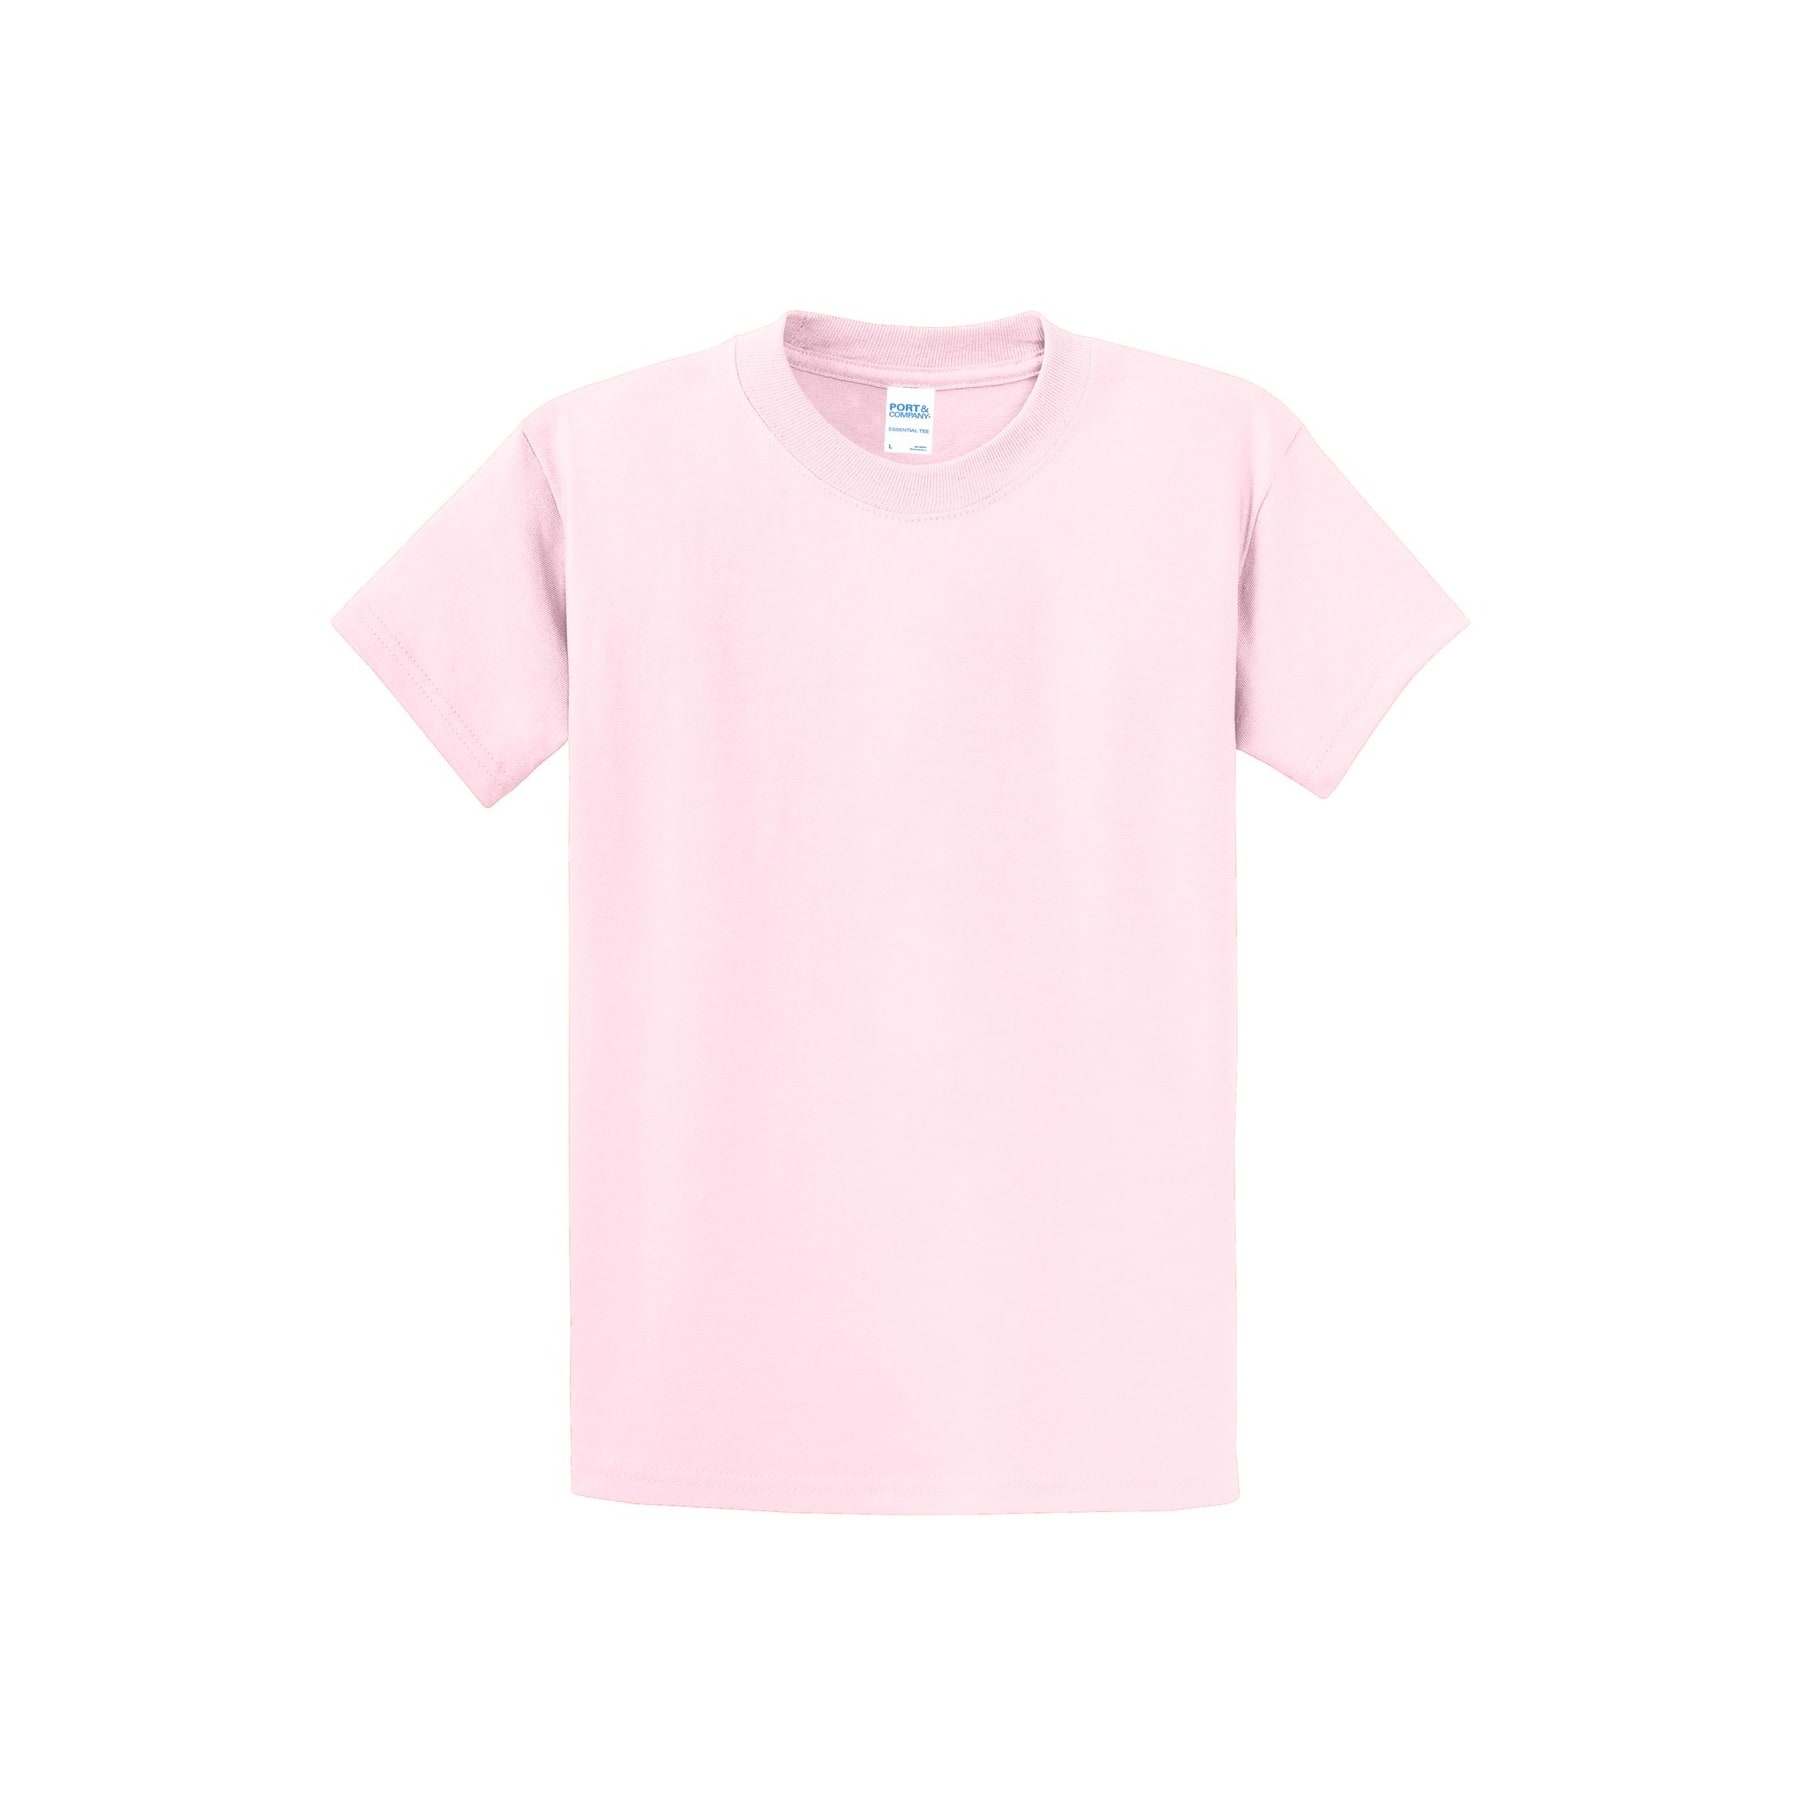 Port & Company PC61 Essential Tee - Pale Pink - M